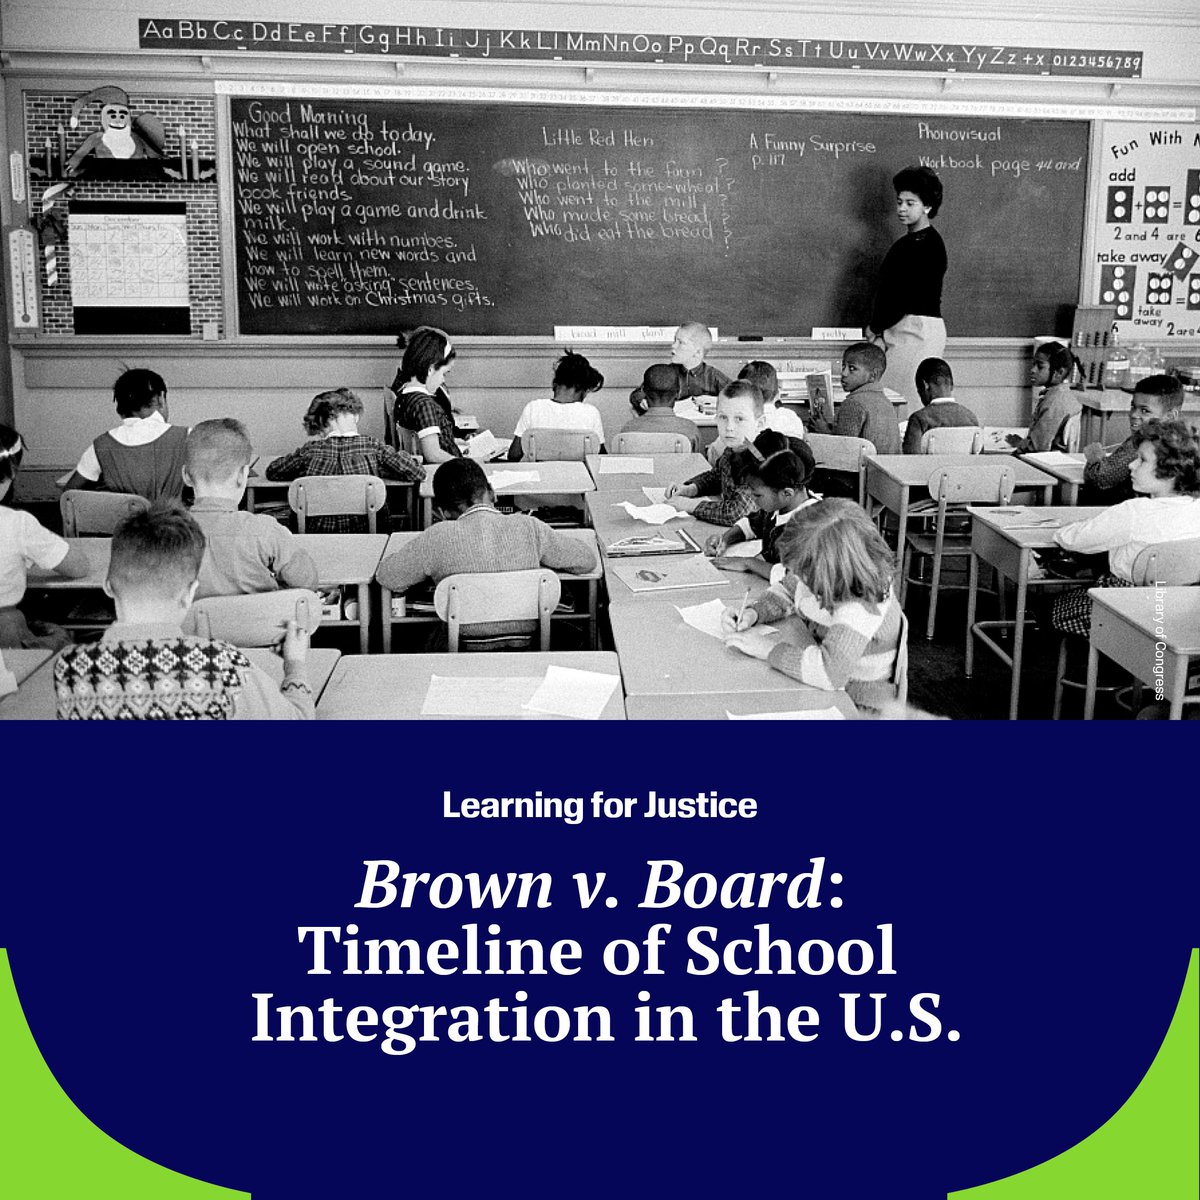 This week, 70 years ago, the Supreme Court in #BrownVBoard of Education of Topeka, Kansas, outlawed school segregation. 📲Revisit the @LearnForJustice resource to trace school integration, starting in 1849: bit.ly/3UD5xOm #ChildrensRights #USHistory